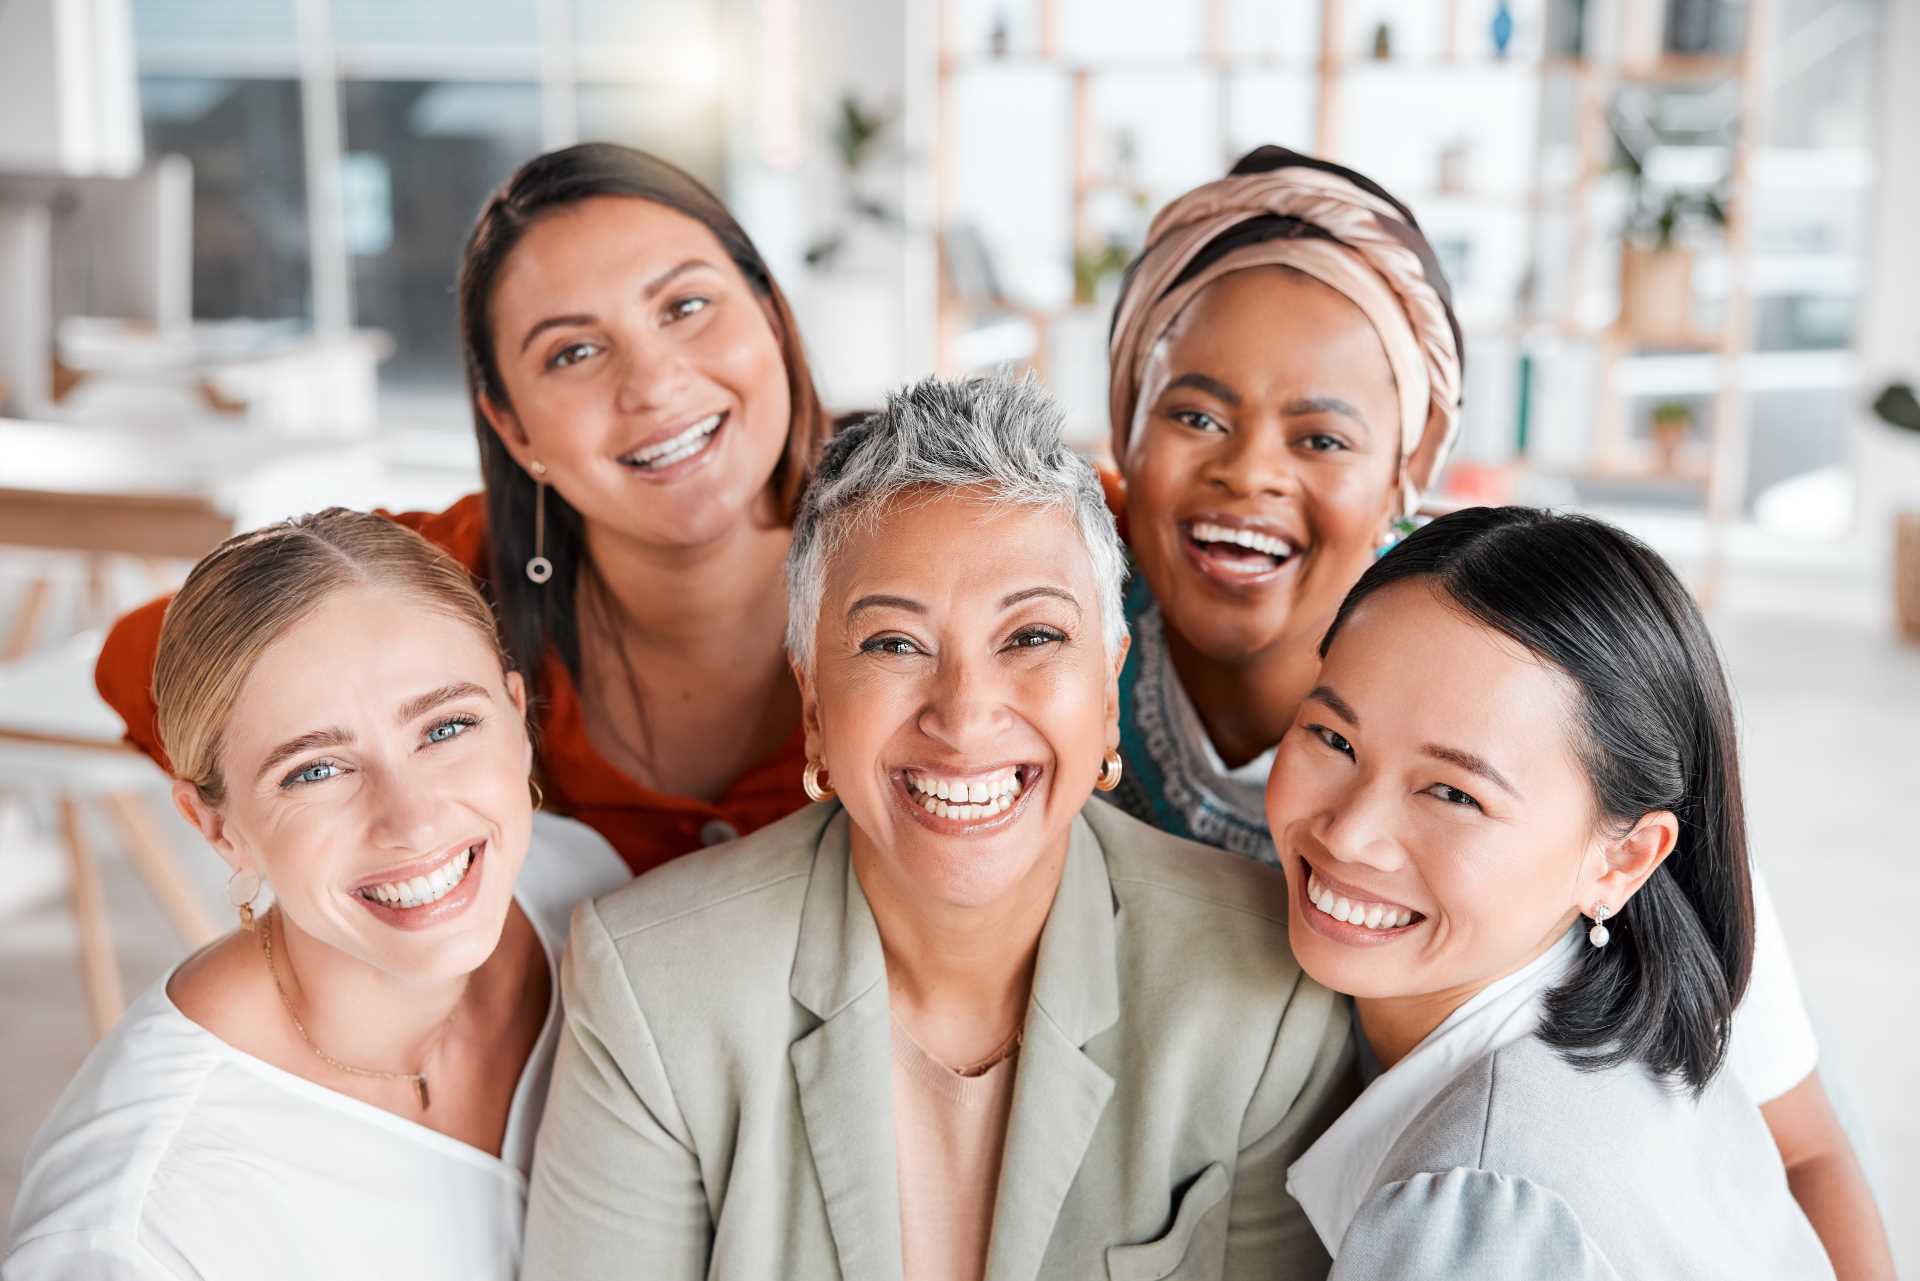 Group of women smiling | Featured image for the Women’s Dental Health blog by Pearl Denture Studio.